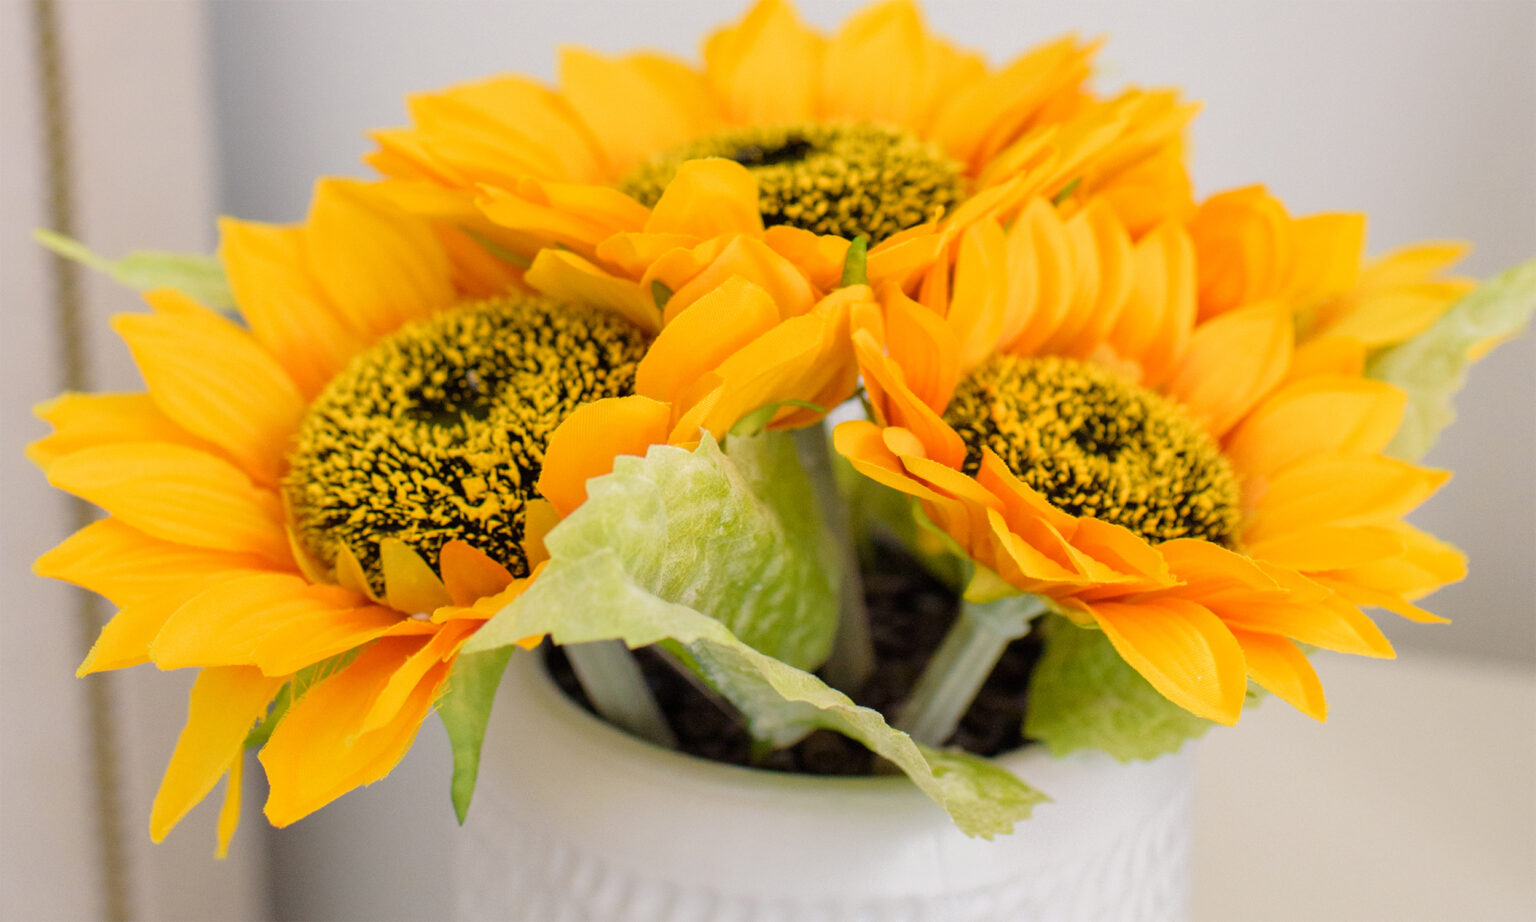 Close-up of yellow sunflowers in vase